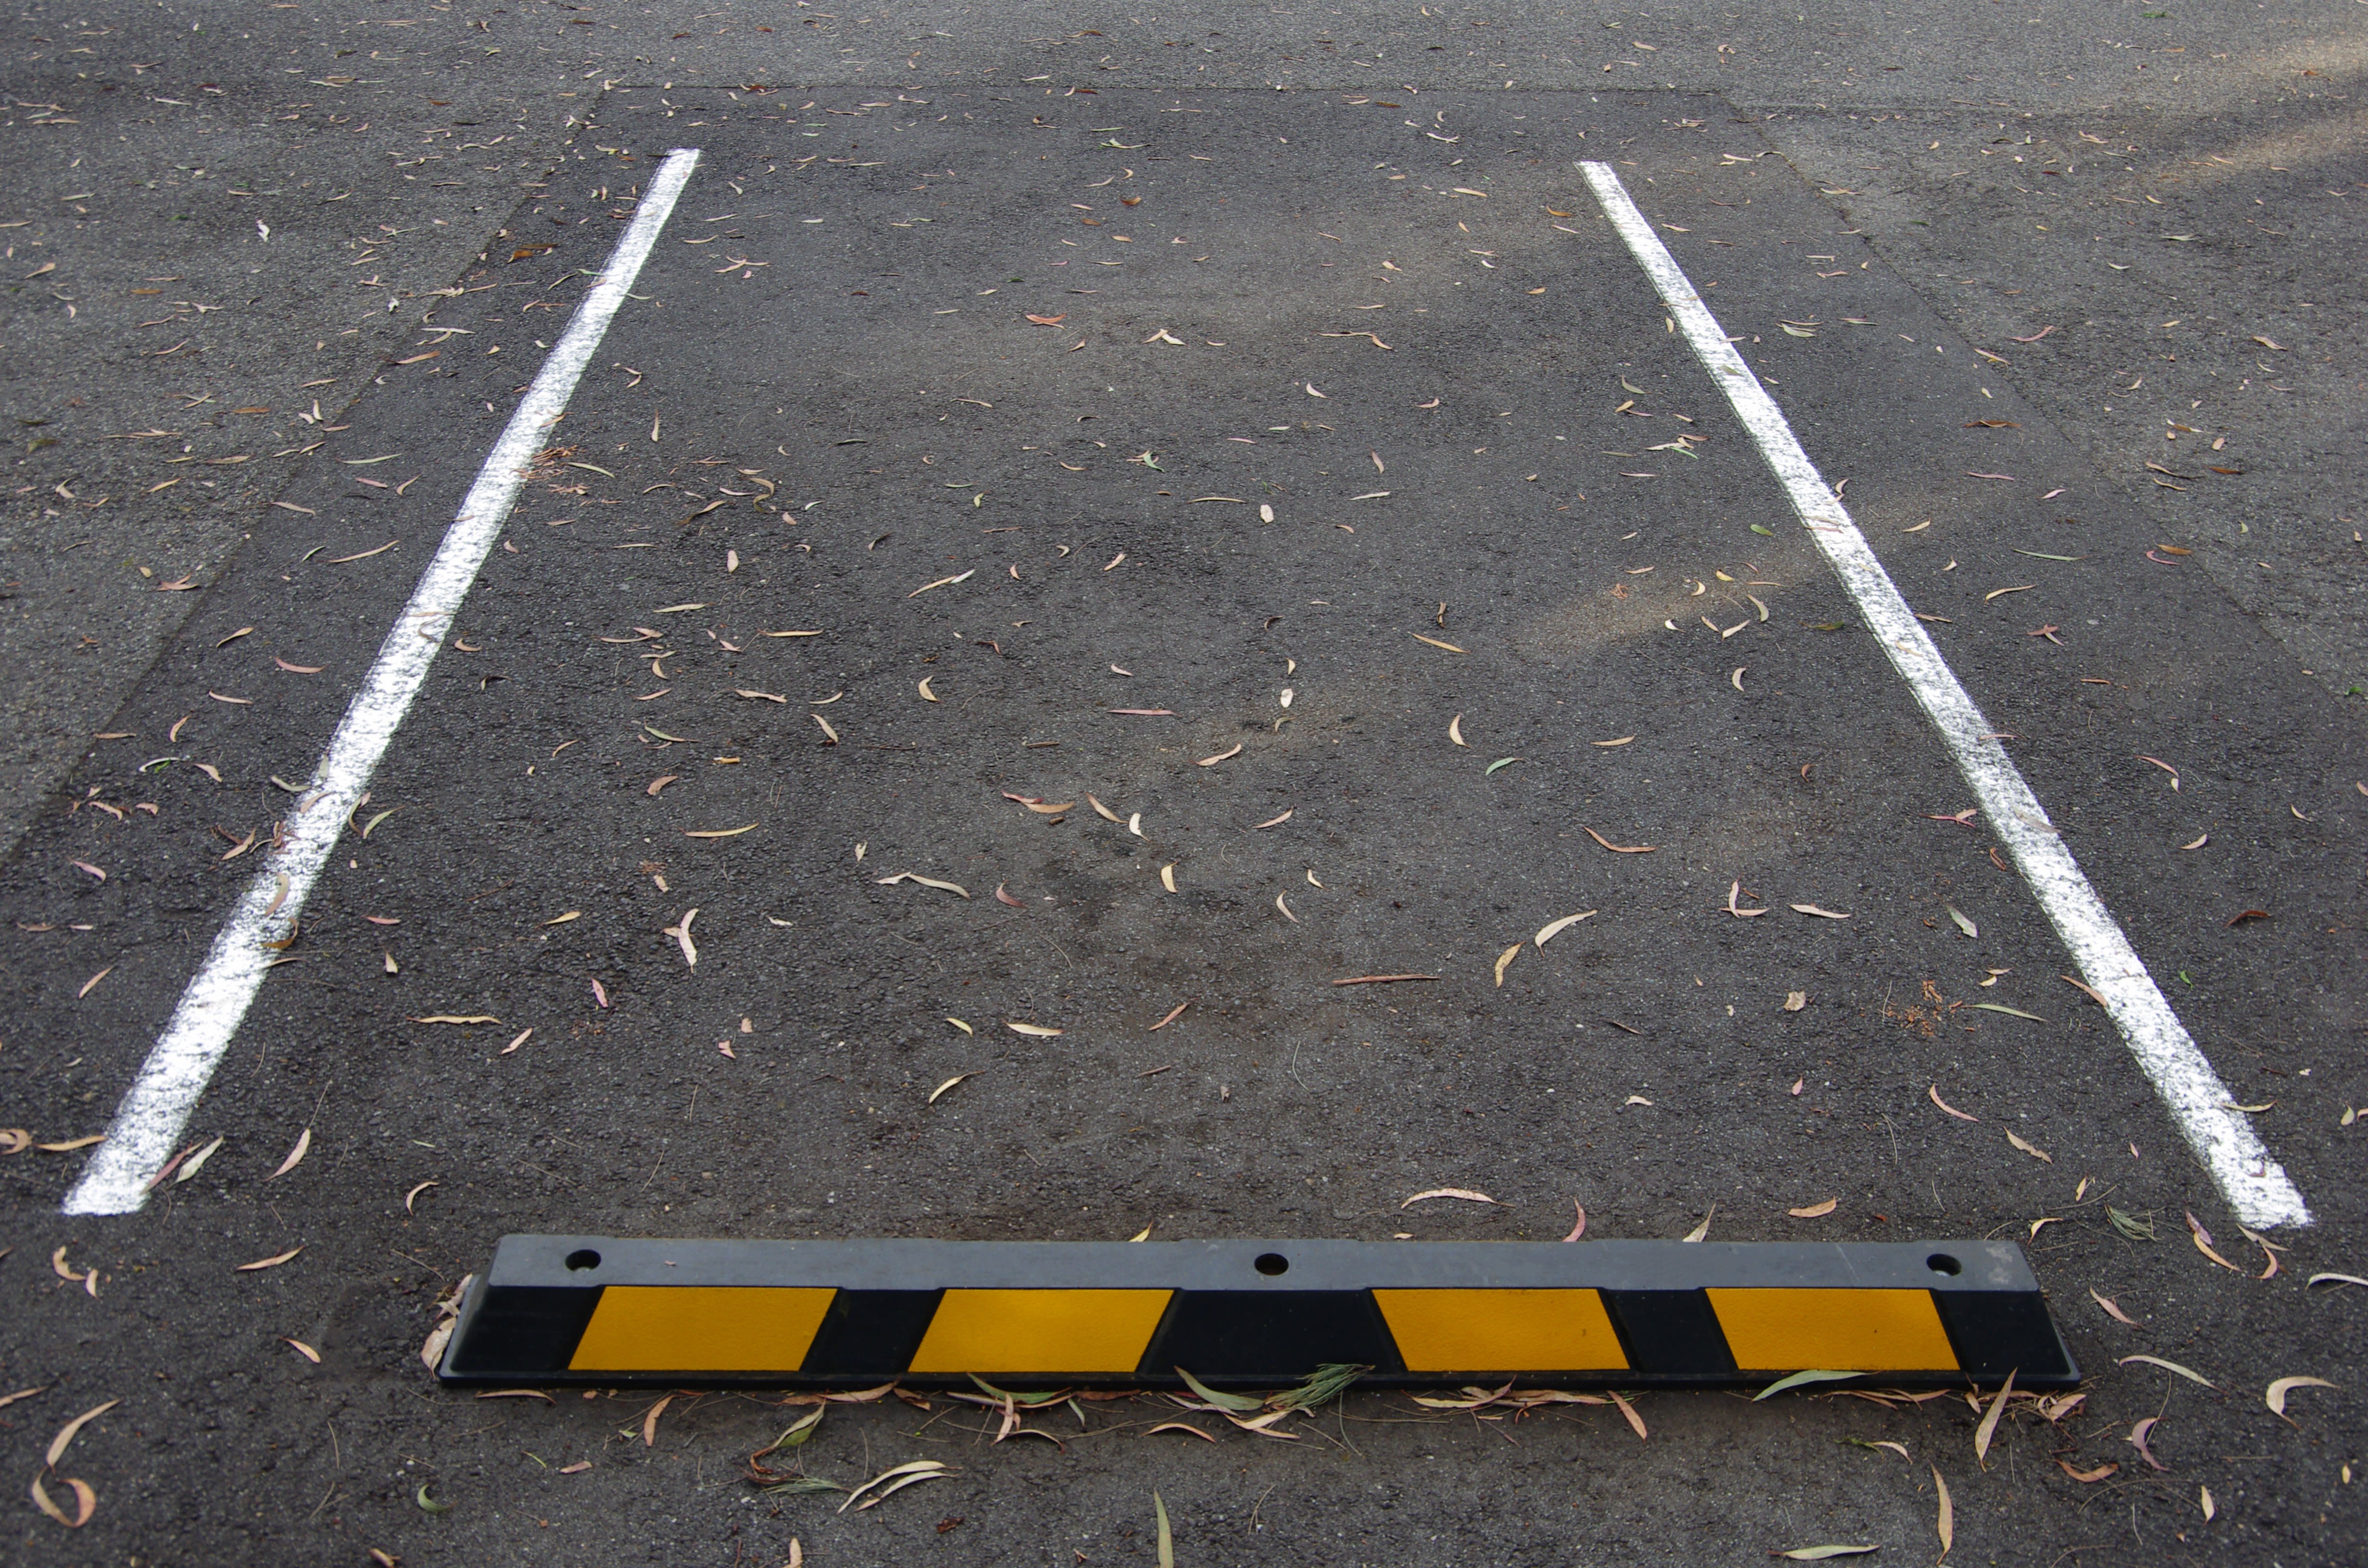 A Single Car Parking Spot Just Sold in Hong Kong for Almost a Million